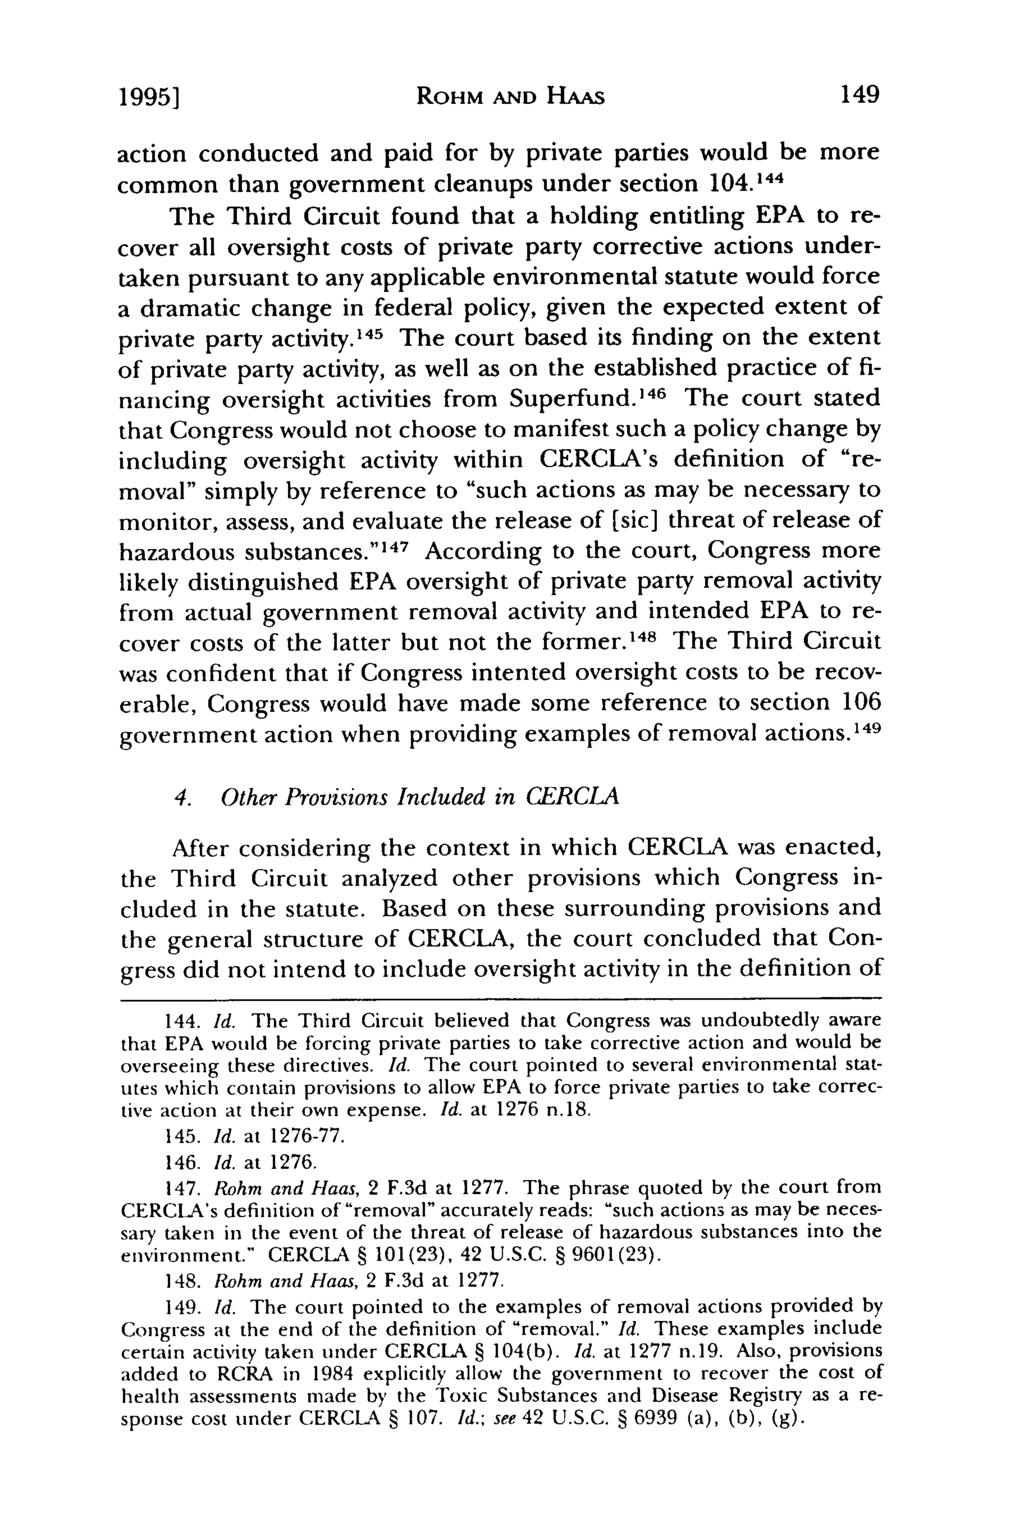 19951 Aberbach: Recoverability of Government Oversight Costs under CERCLA Section ROHM AND HAAS action conducted and paid for by private parties would be more common than government cleanups under